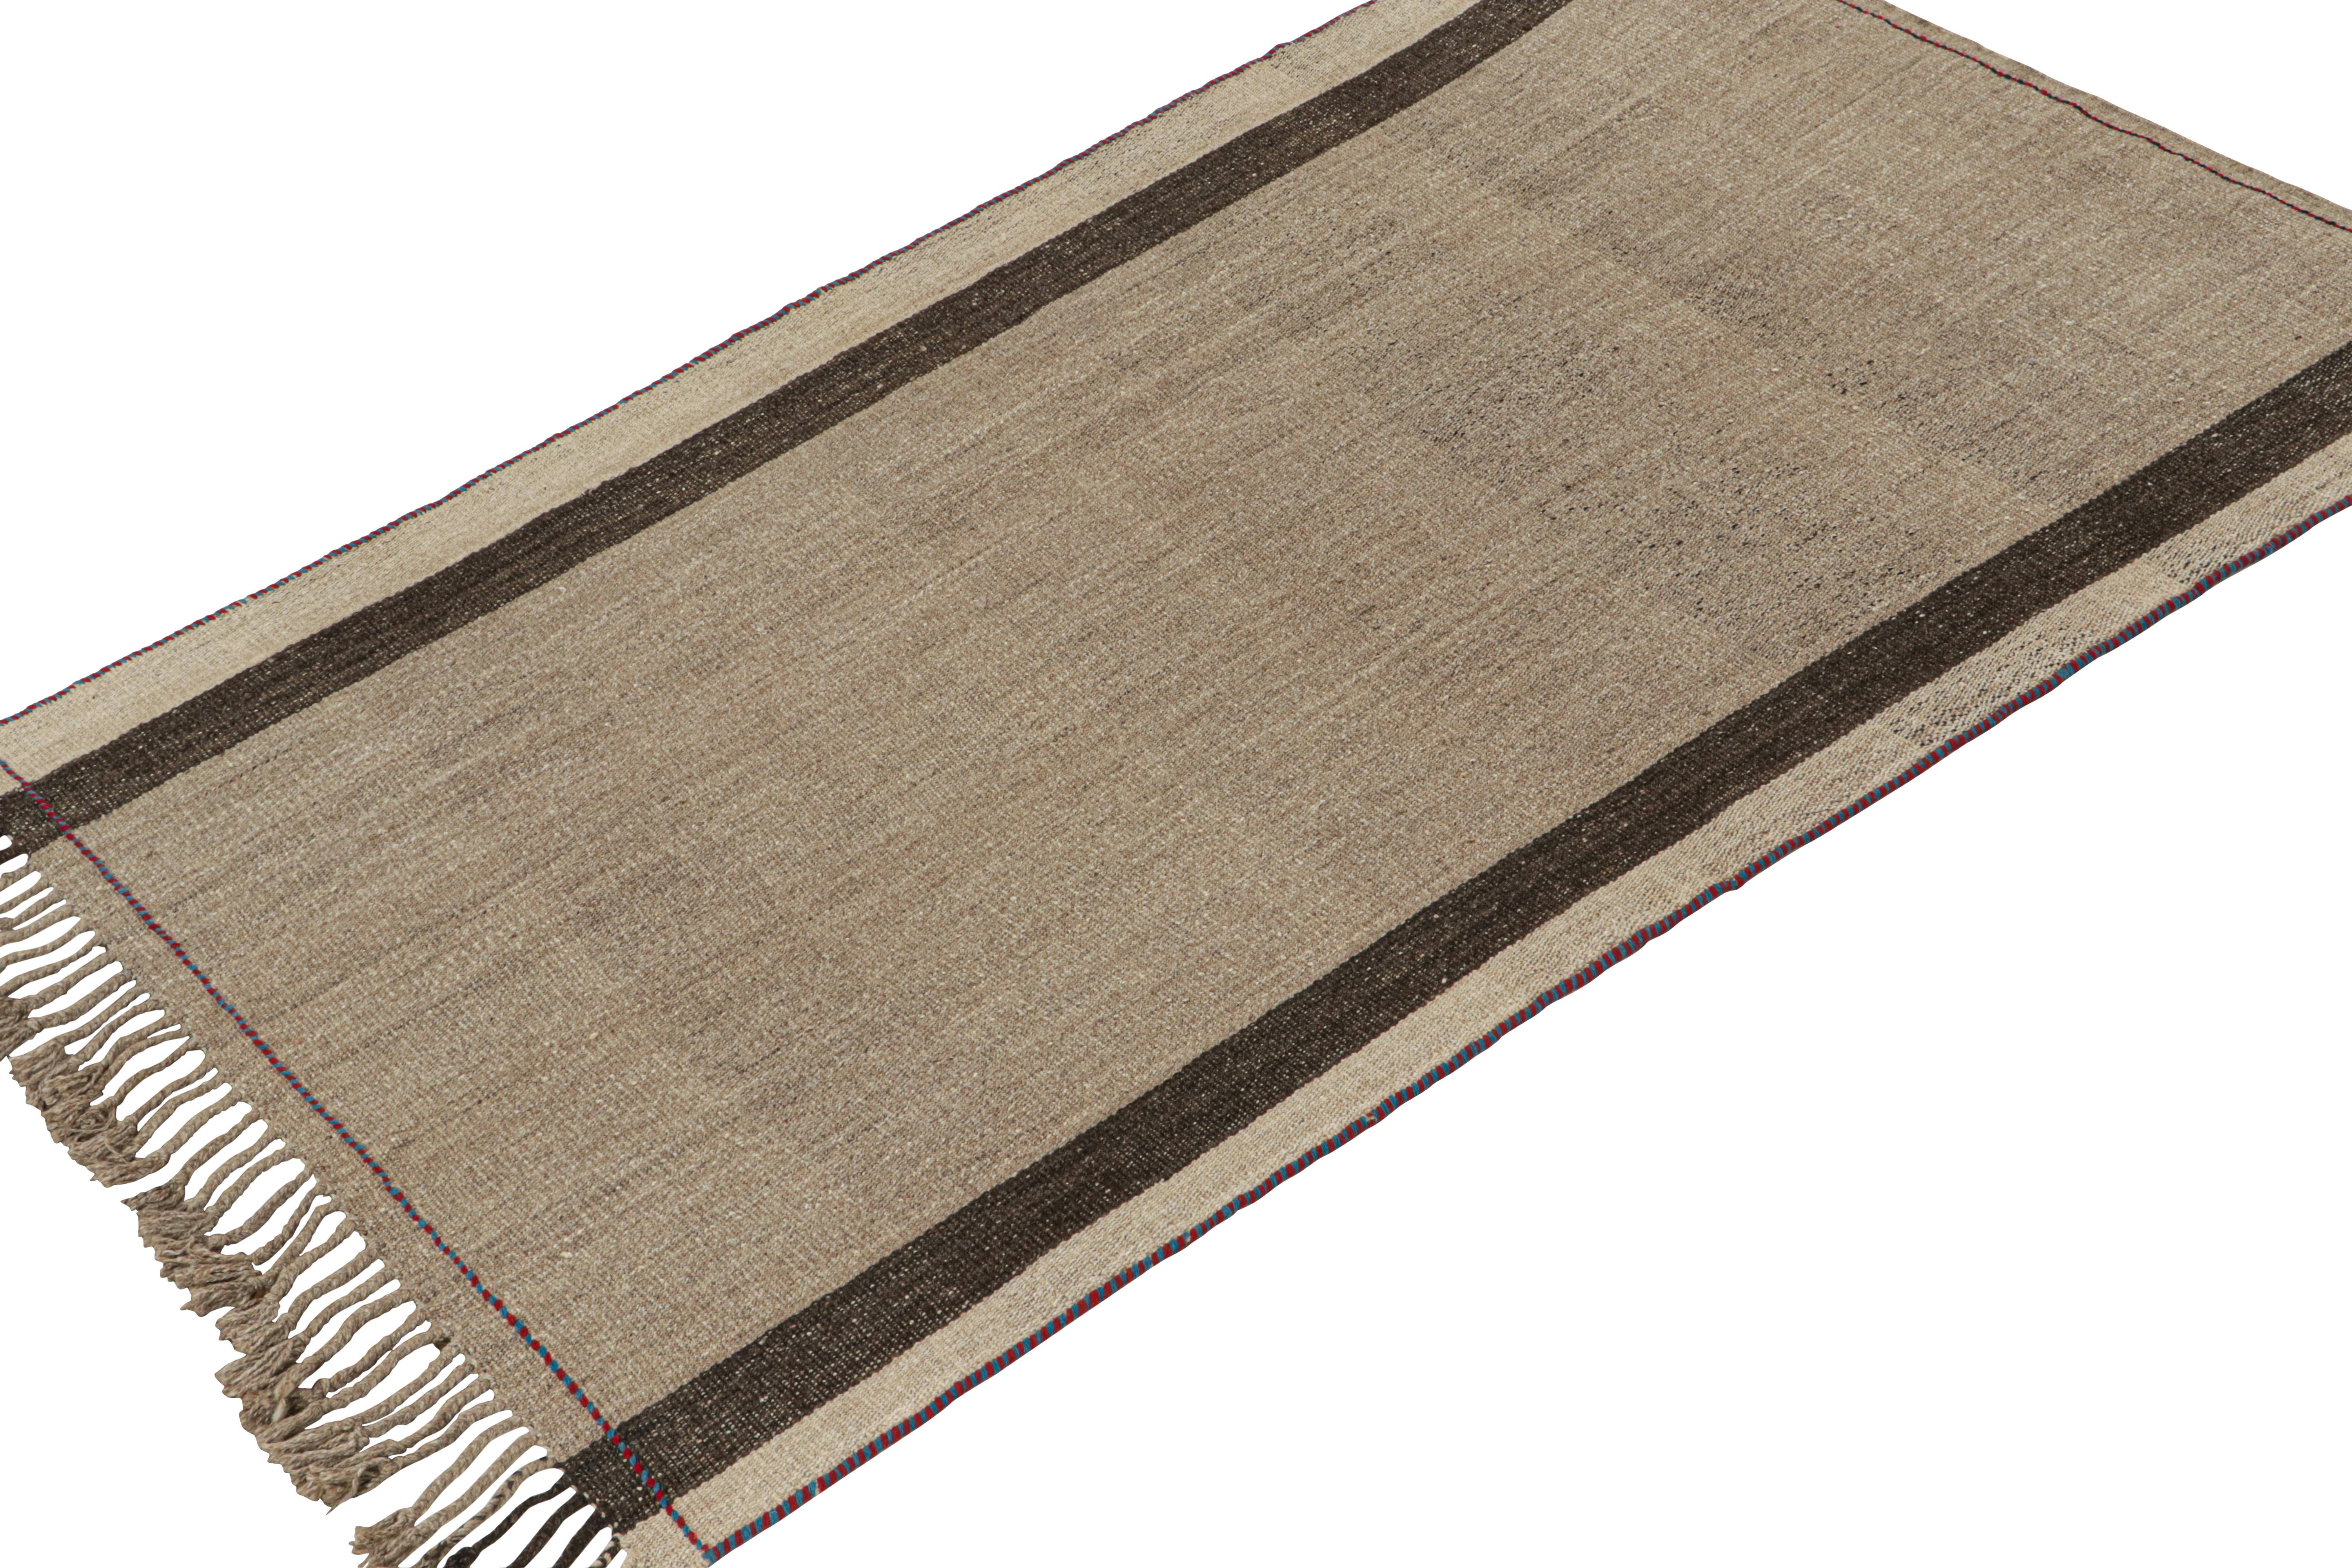 This vintage 4x7 Persian tribal kilim is handwoven in wool, and originates circa 1950-1960.

The design favors neutral tones with a beige field, rich brown stripes in the outer field and border. Keen eyes will further note a fine red and blue